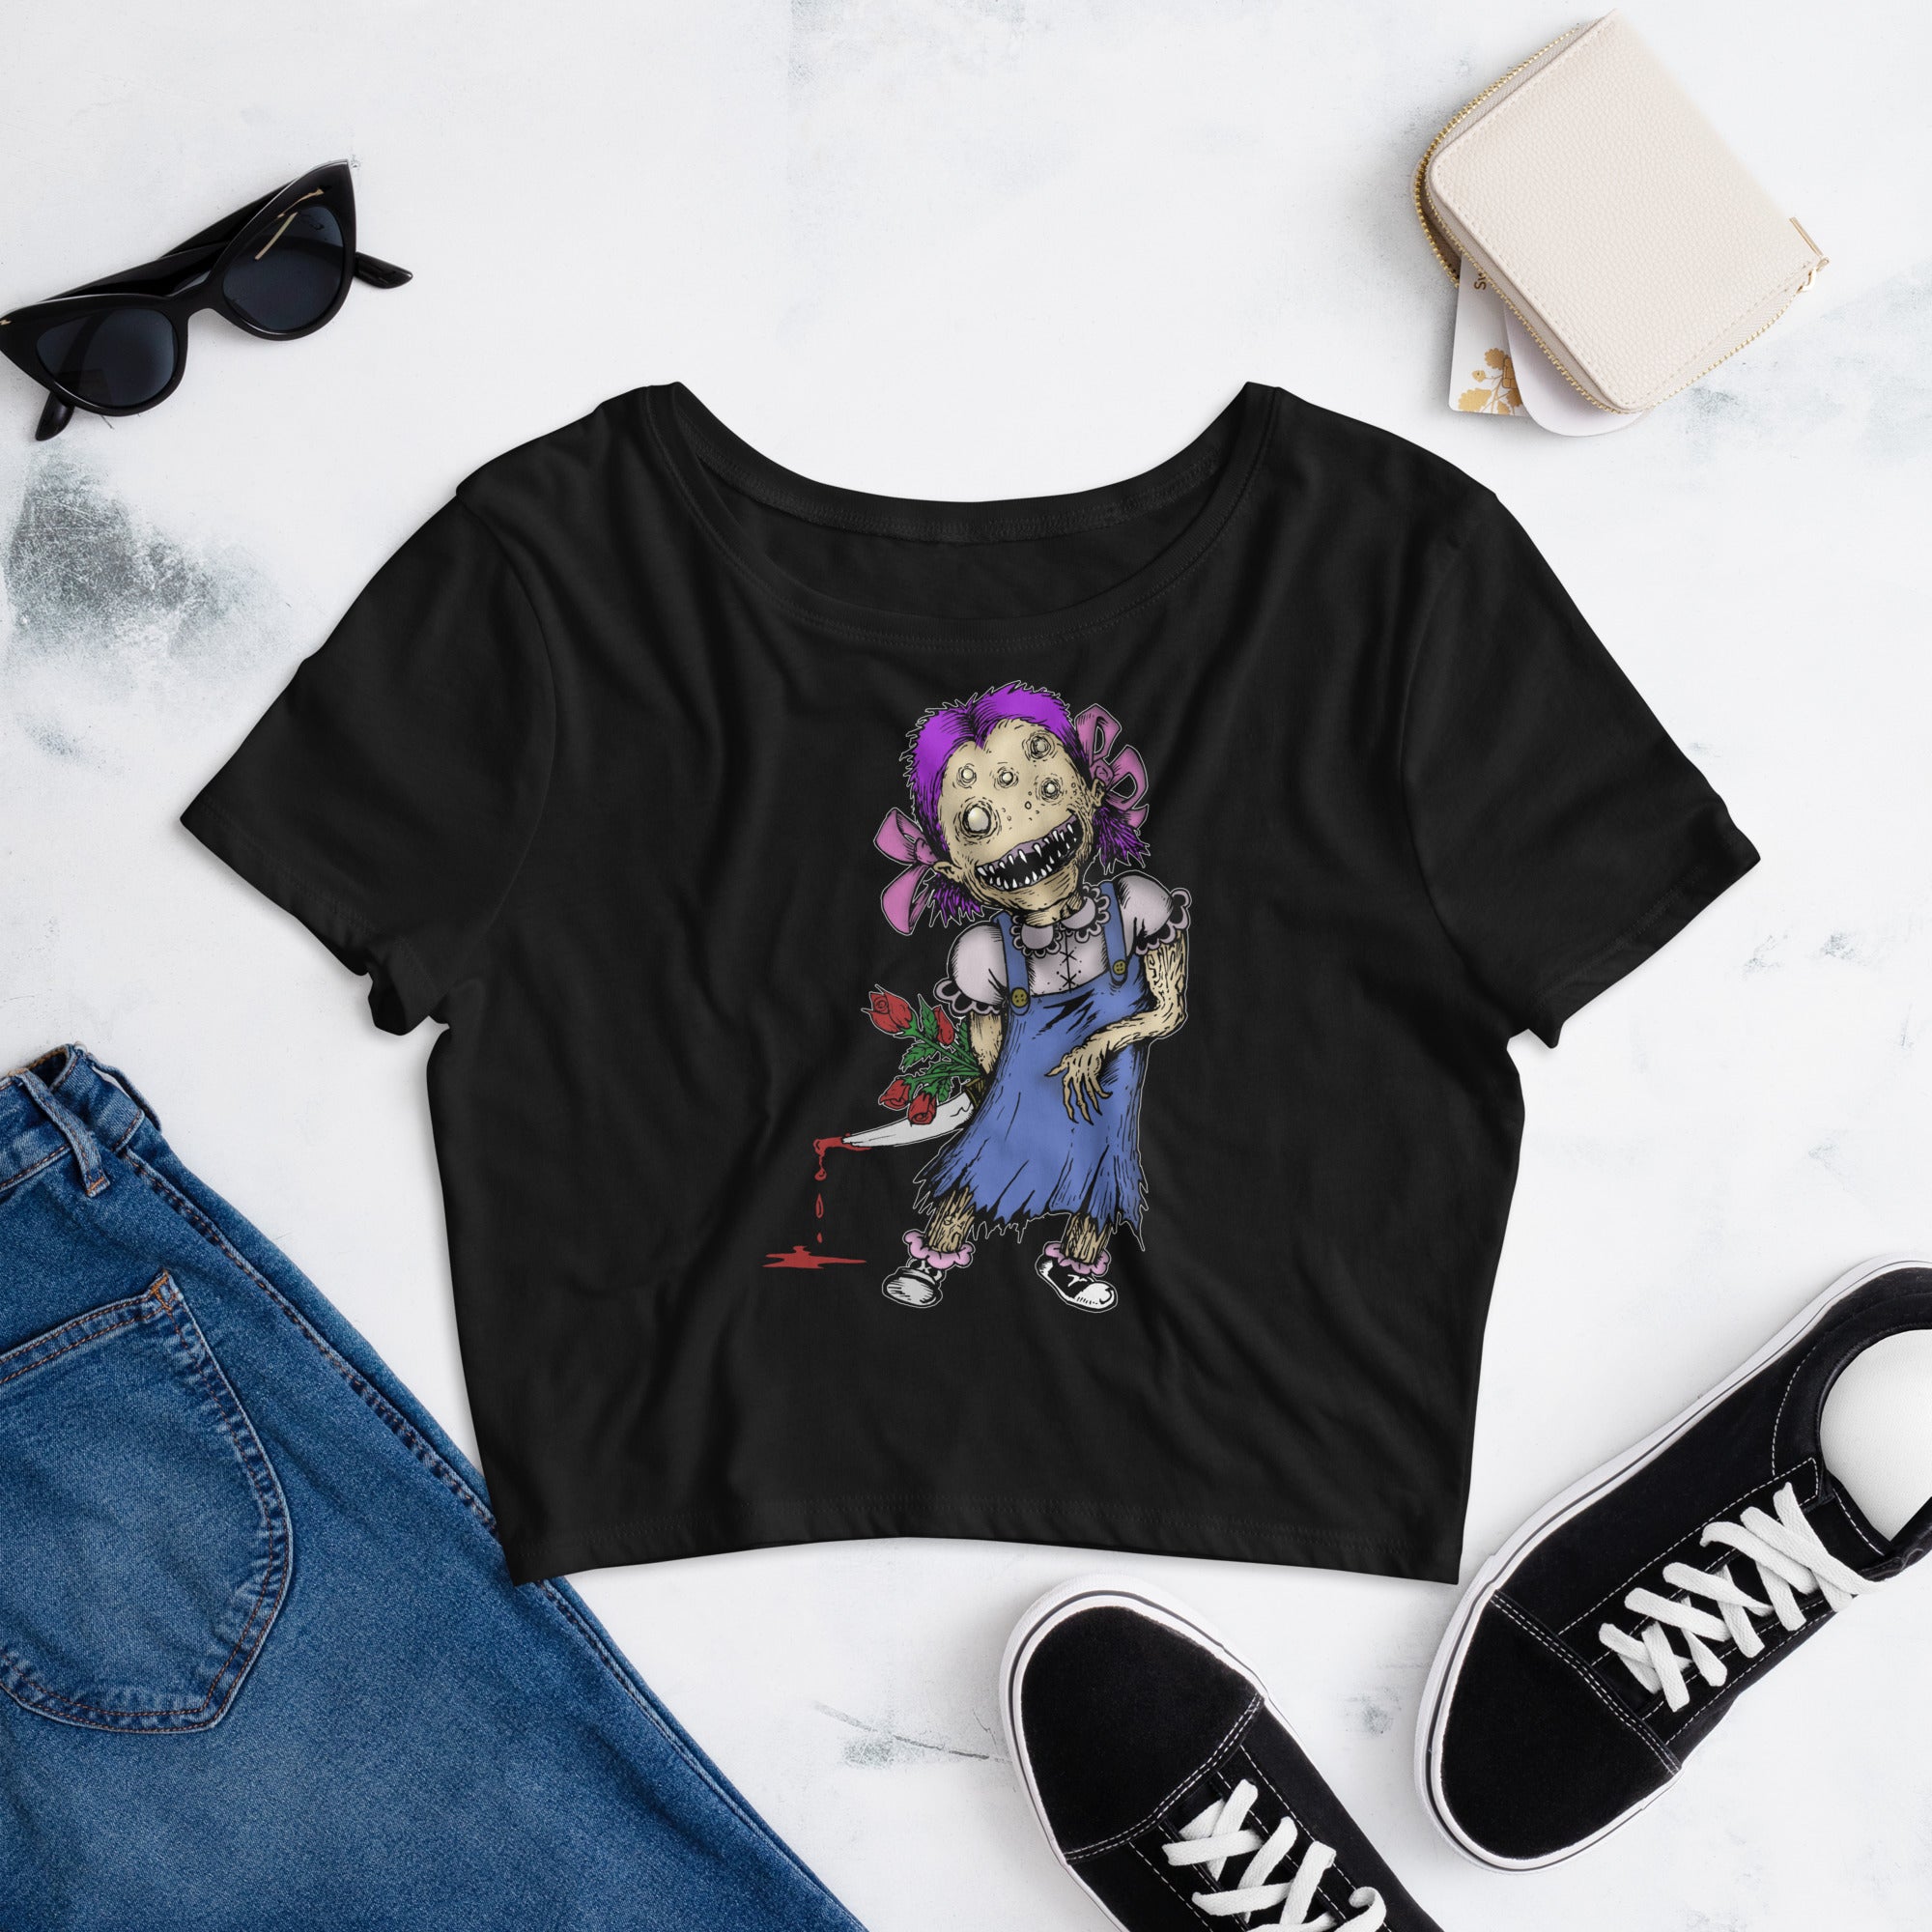 Wicked Little Girl with Bloody Knife Horror Style Women’s Crop Tee - Edge of Life Designs